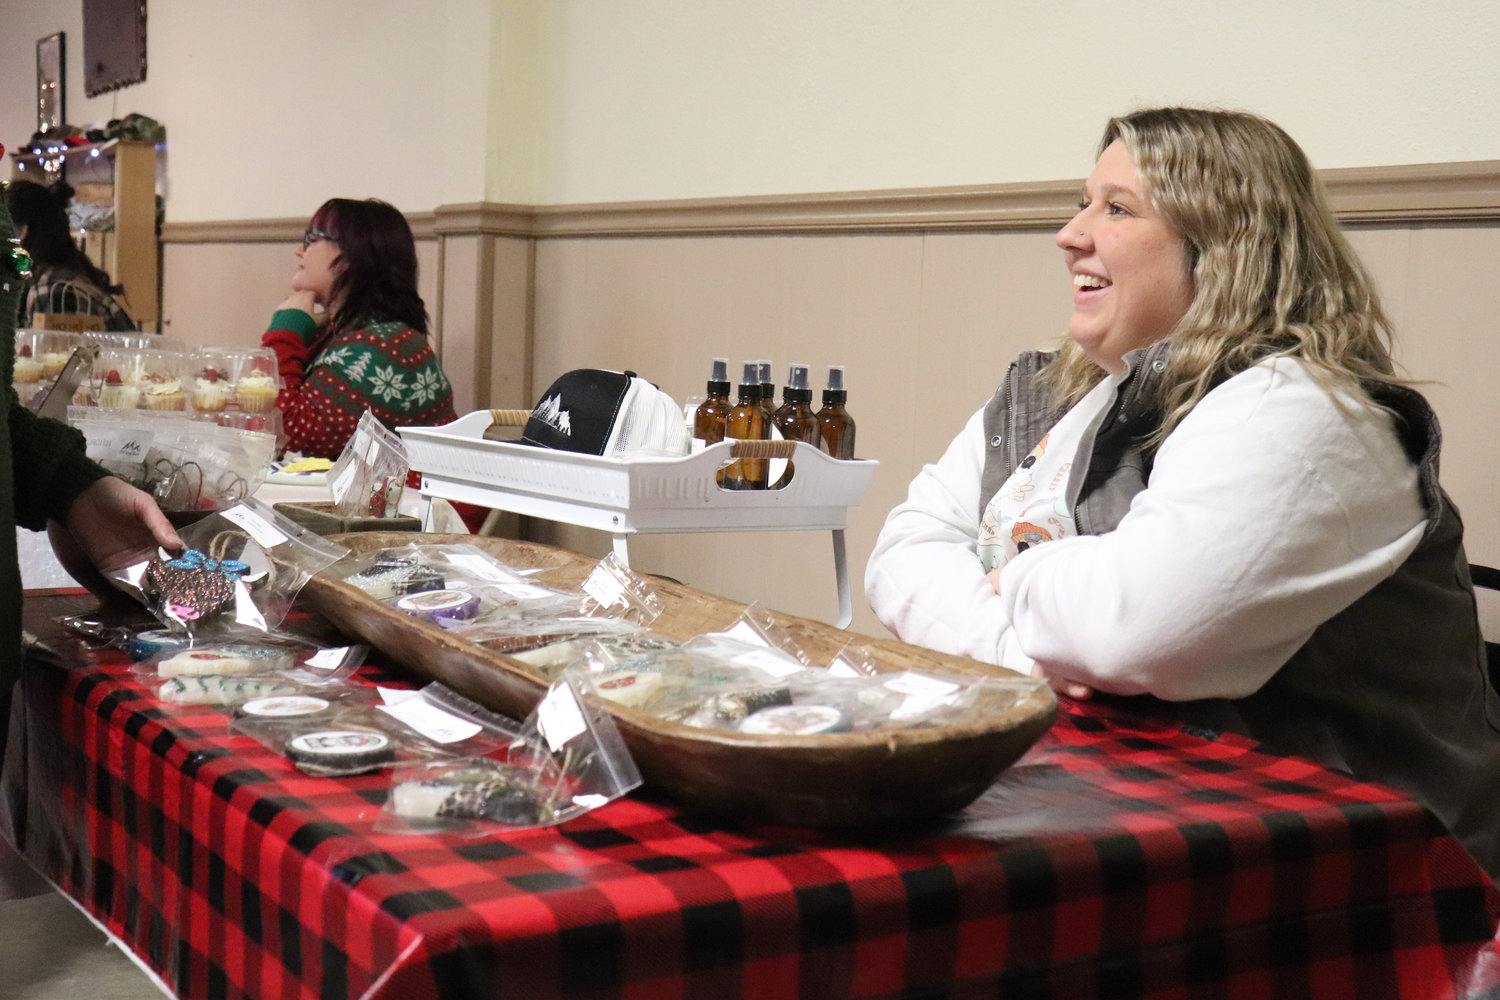 Vendors Pacific Northwest Smelly Things, Frostitution and Sugar Struck sell their wares during the Breakfast with Santa event at the Moose Family Center in Centralia on Saturday. Lewis County Work Opportunities also sold wreaths at the event.